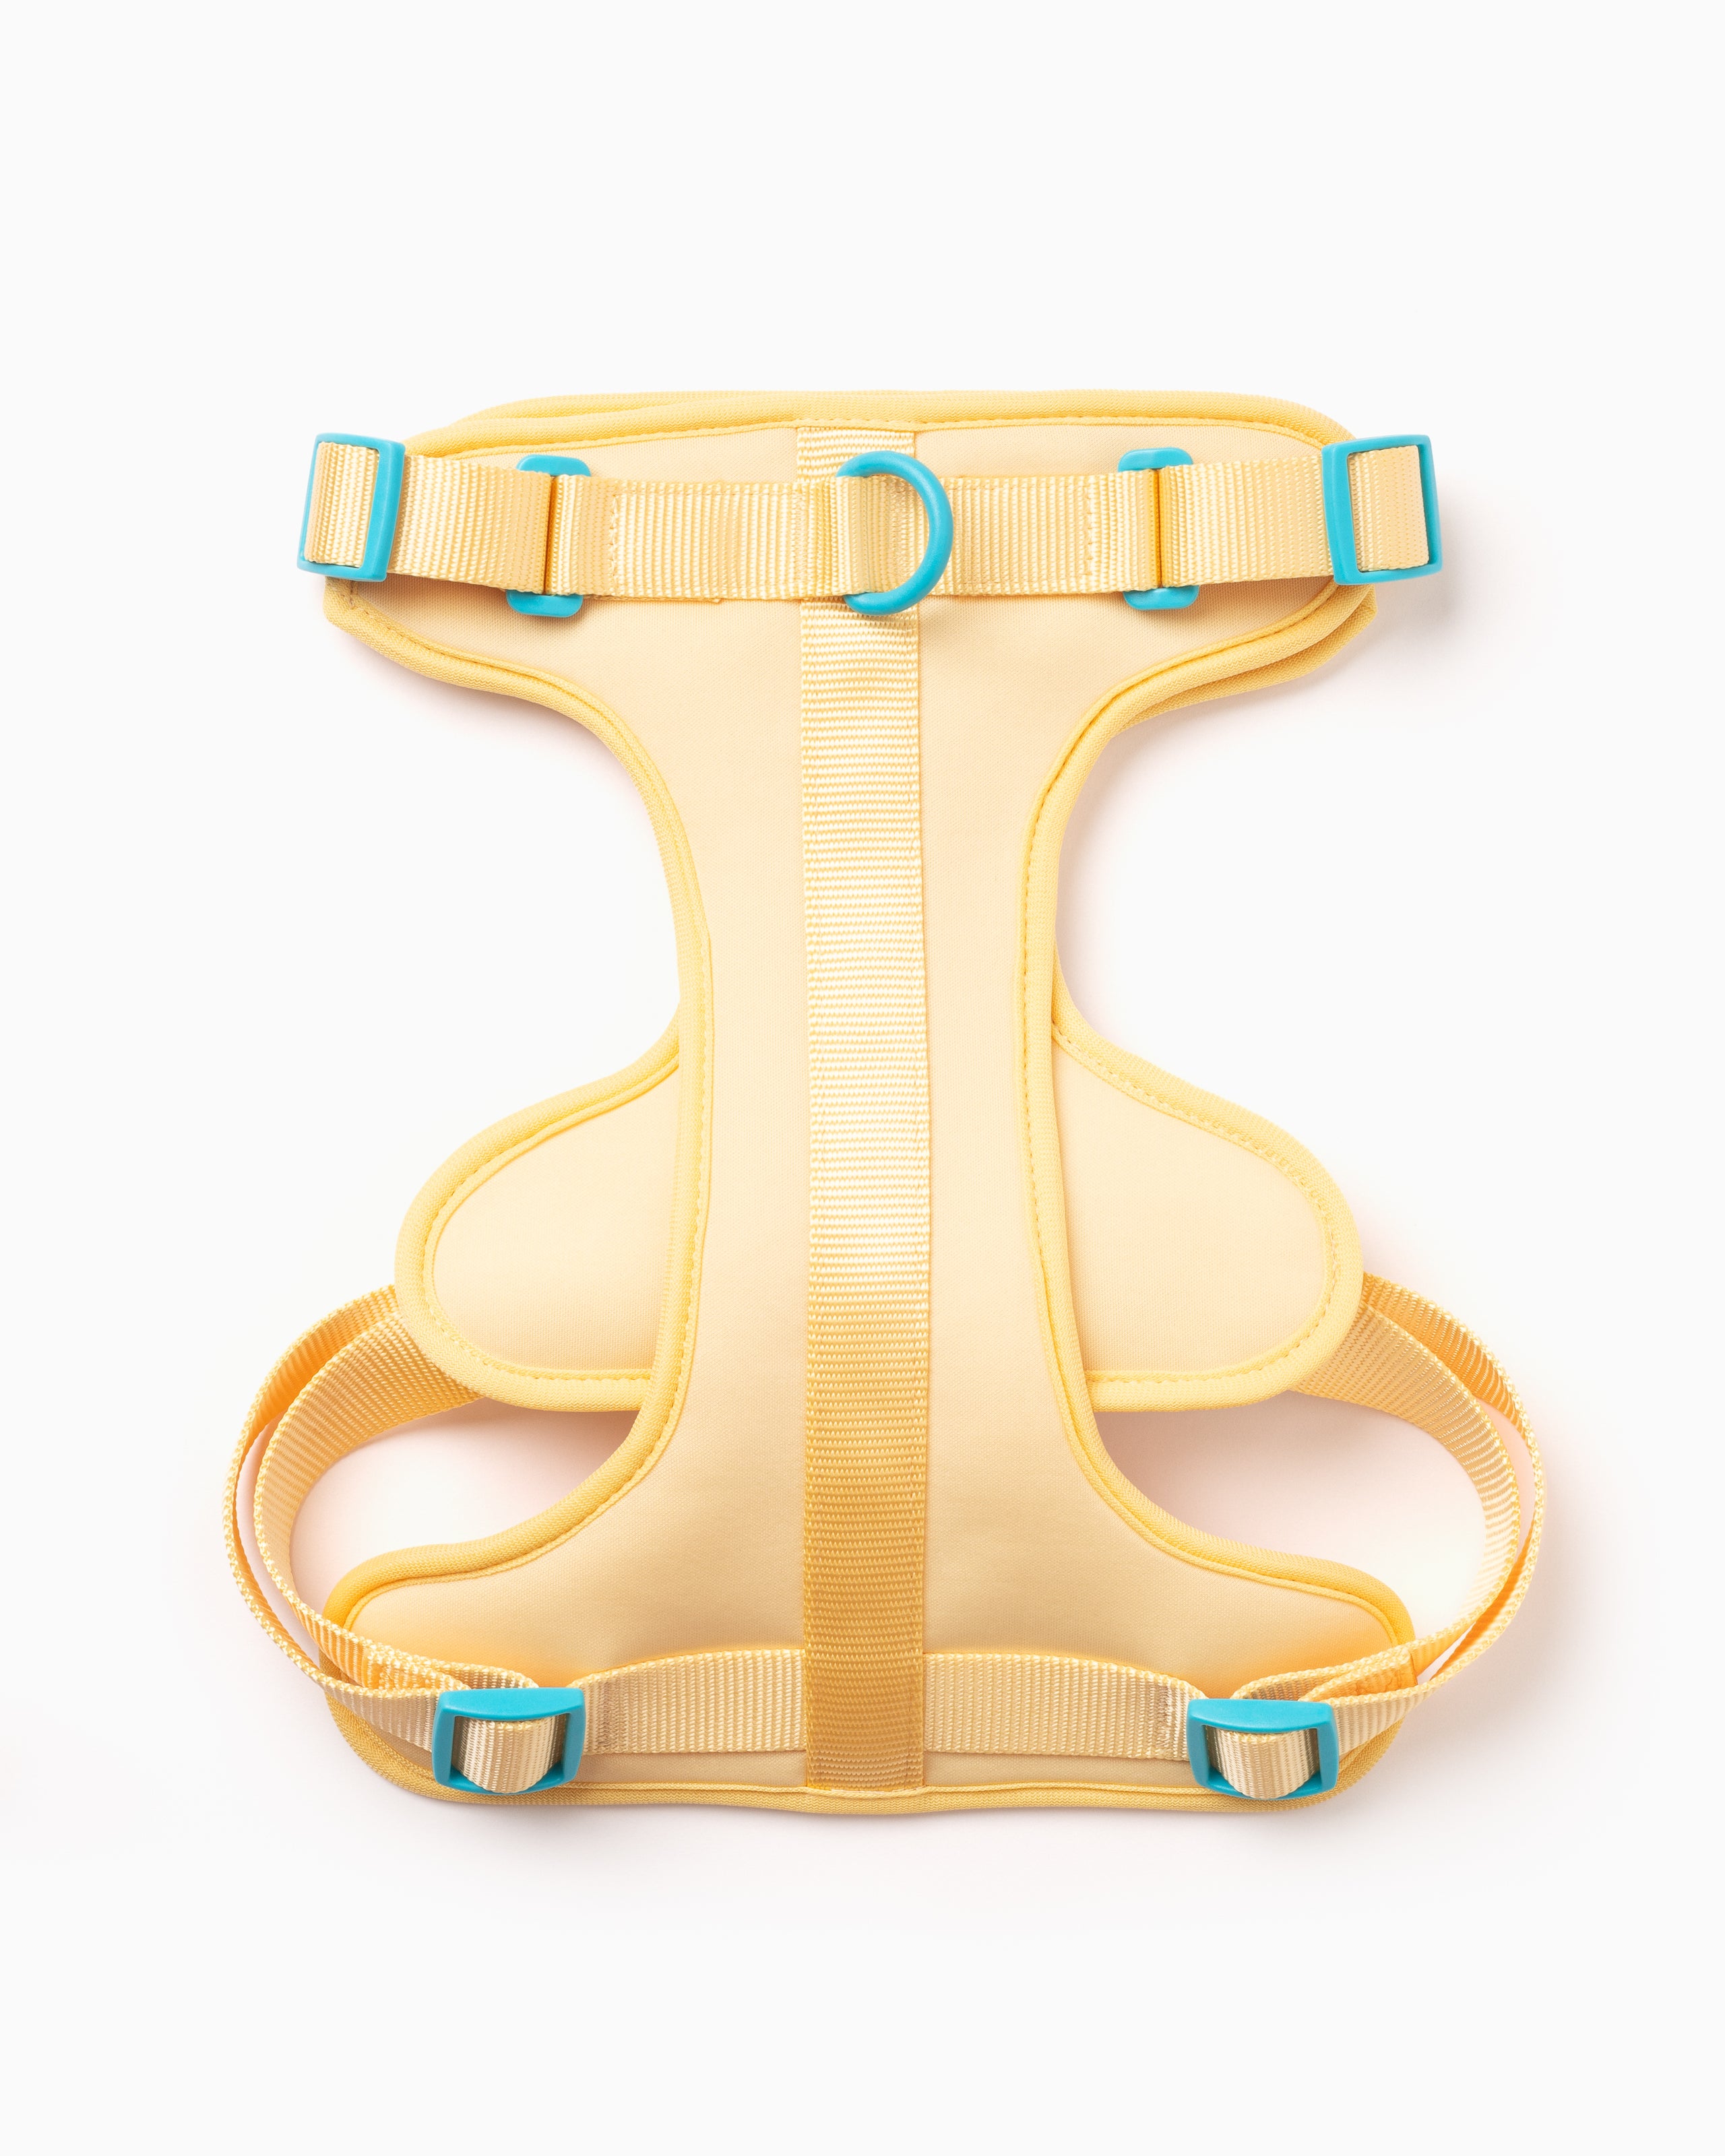 Buttery yellow lightweight two tone dog harness with three d-ring attachments & high quality buckles.